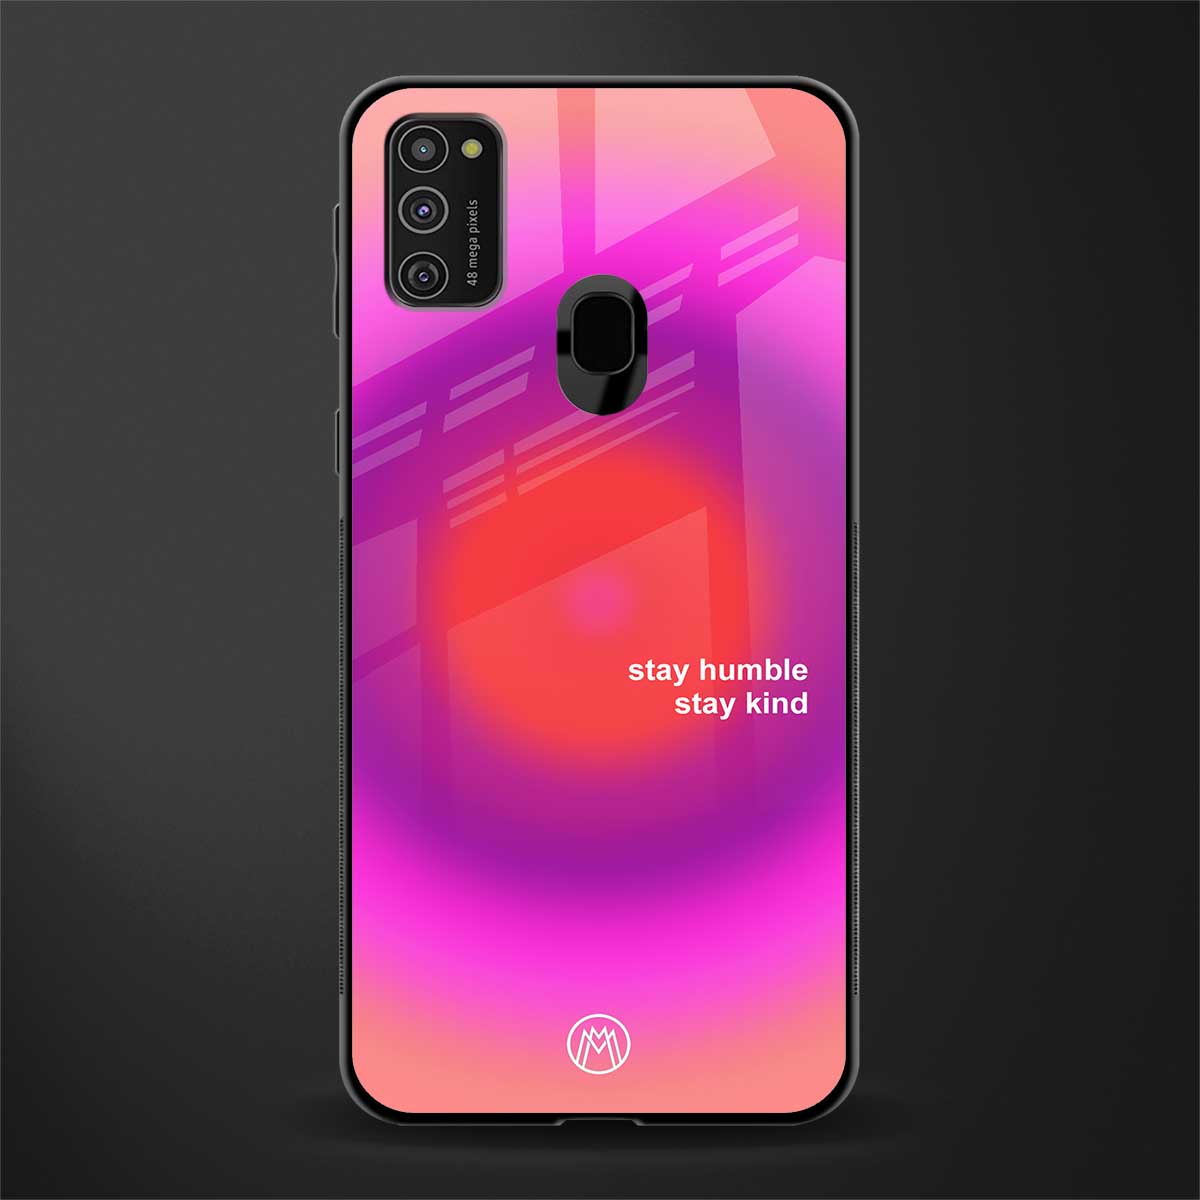 stay kind glass case for samsung galaxy m30s image